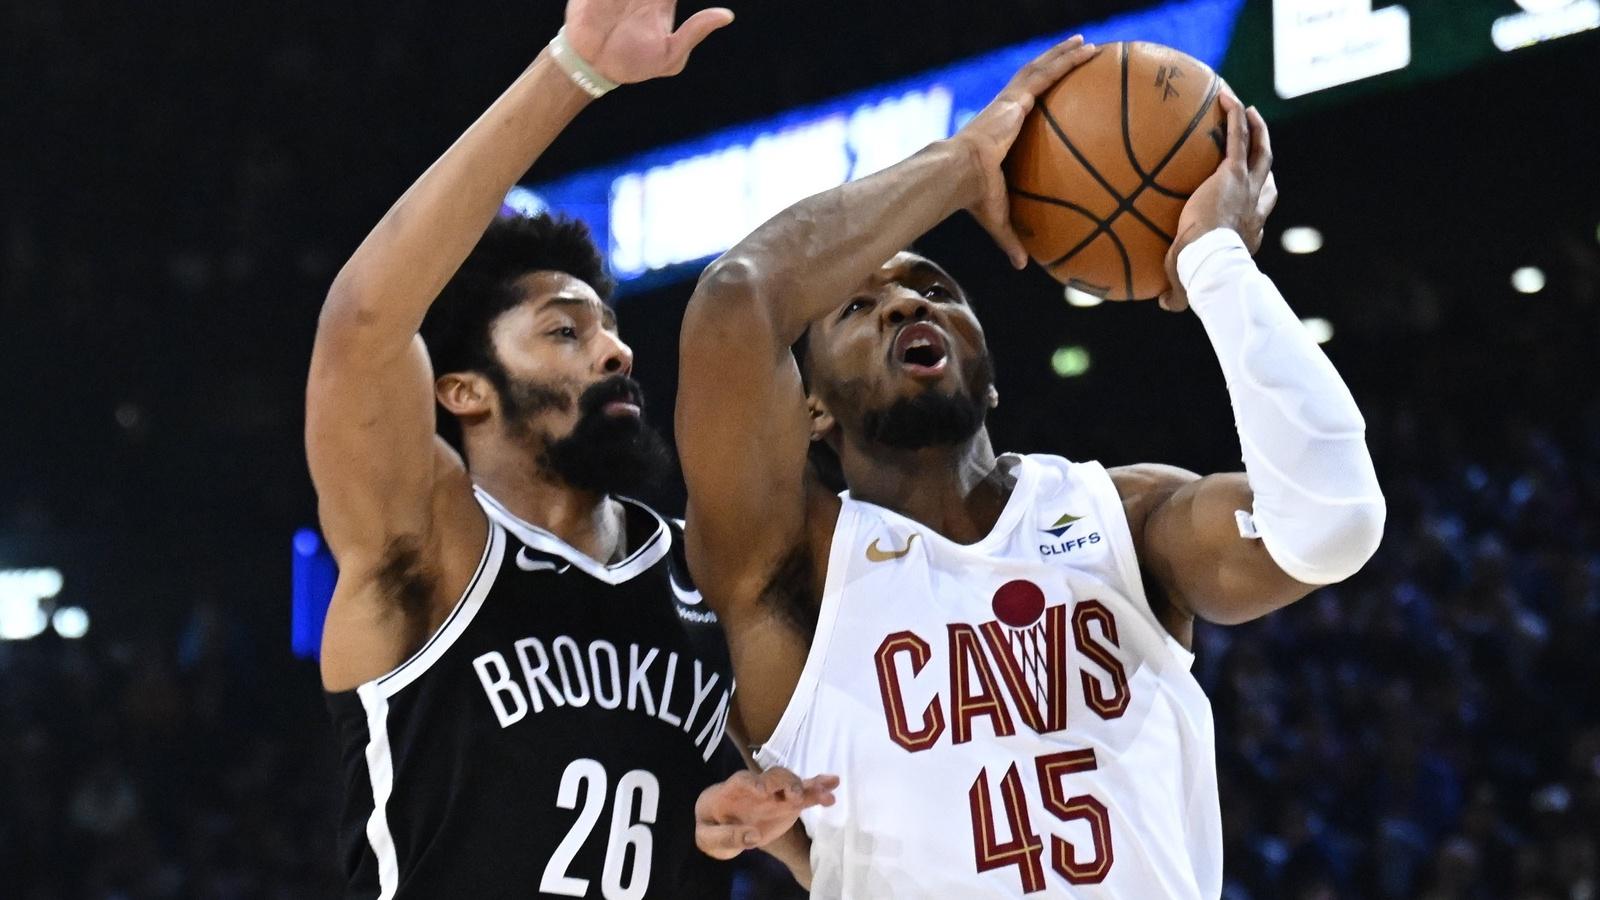 Cleveland Cavaliers guard Donovan Mitchell (45) drives to the basket against Brooklyn Nets guard Spencer Dinwiddie (26) in the NBA Paris Game at AccorHotels Arena. / Alexis Reau-USA TODAY Sports